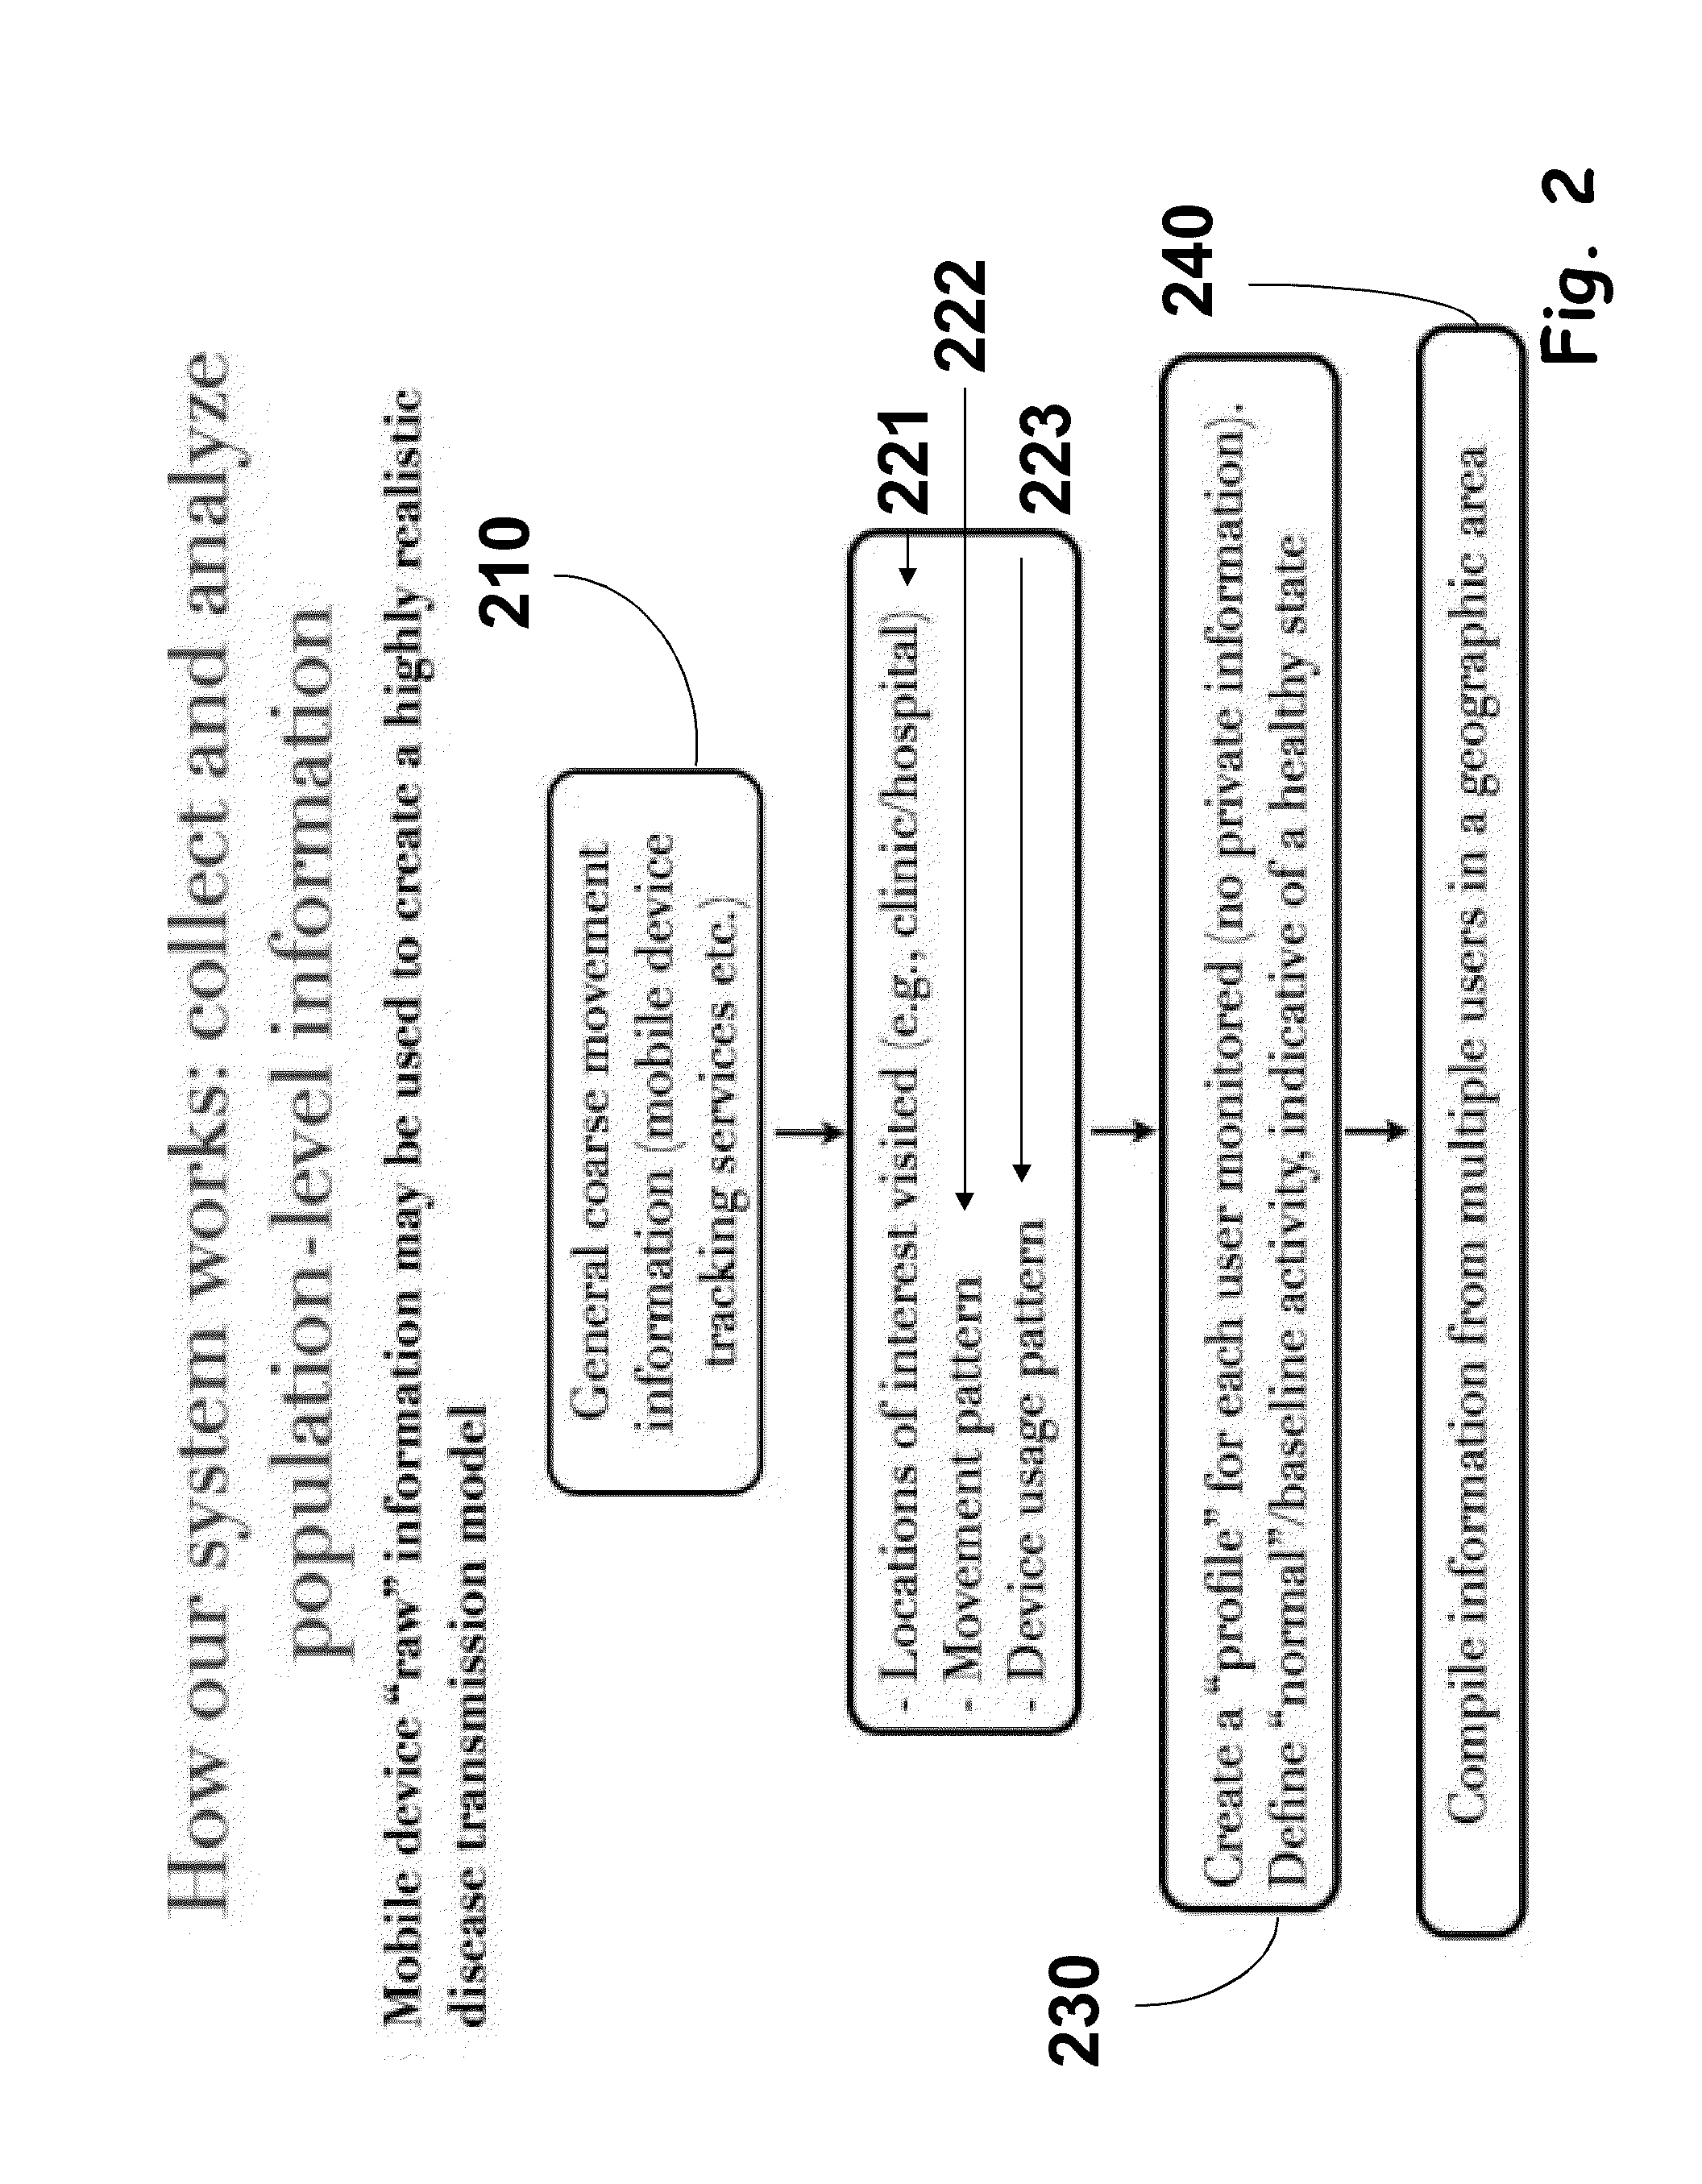 System and method to enable detection of viral infection by users of electronic communication devices